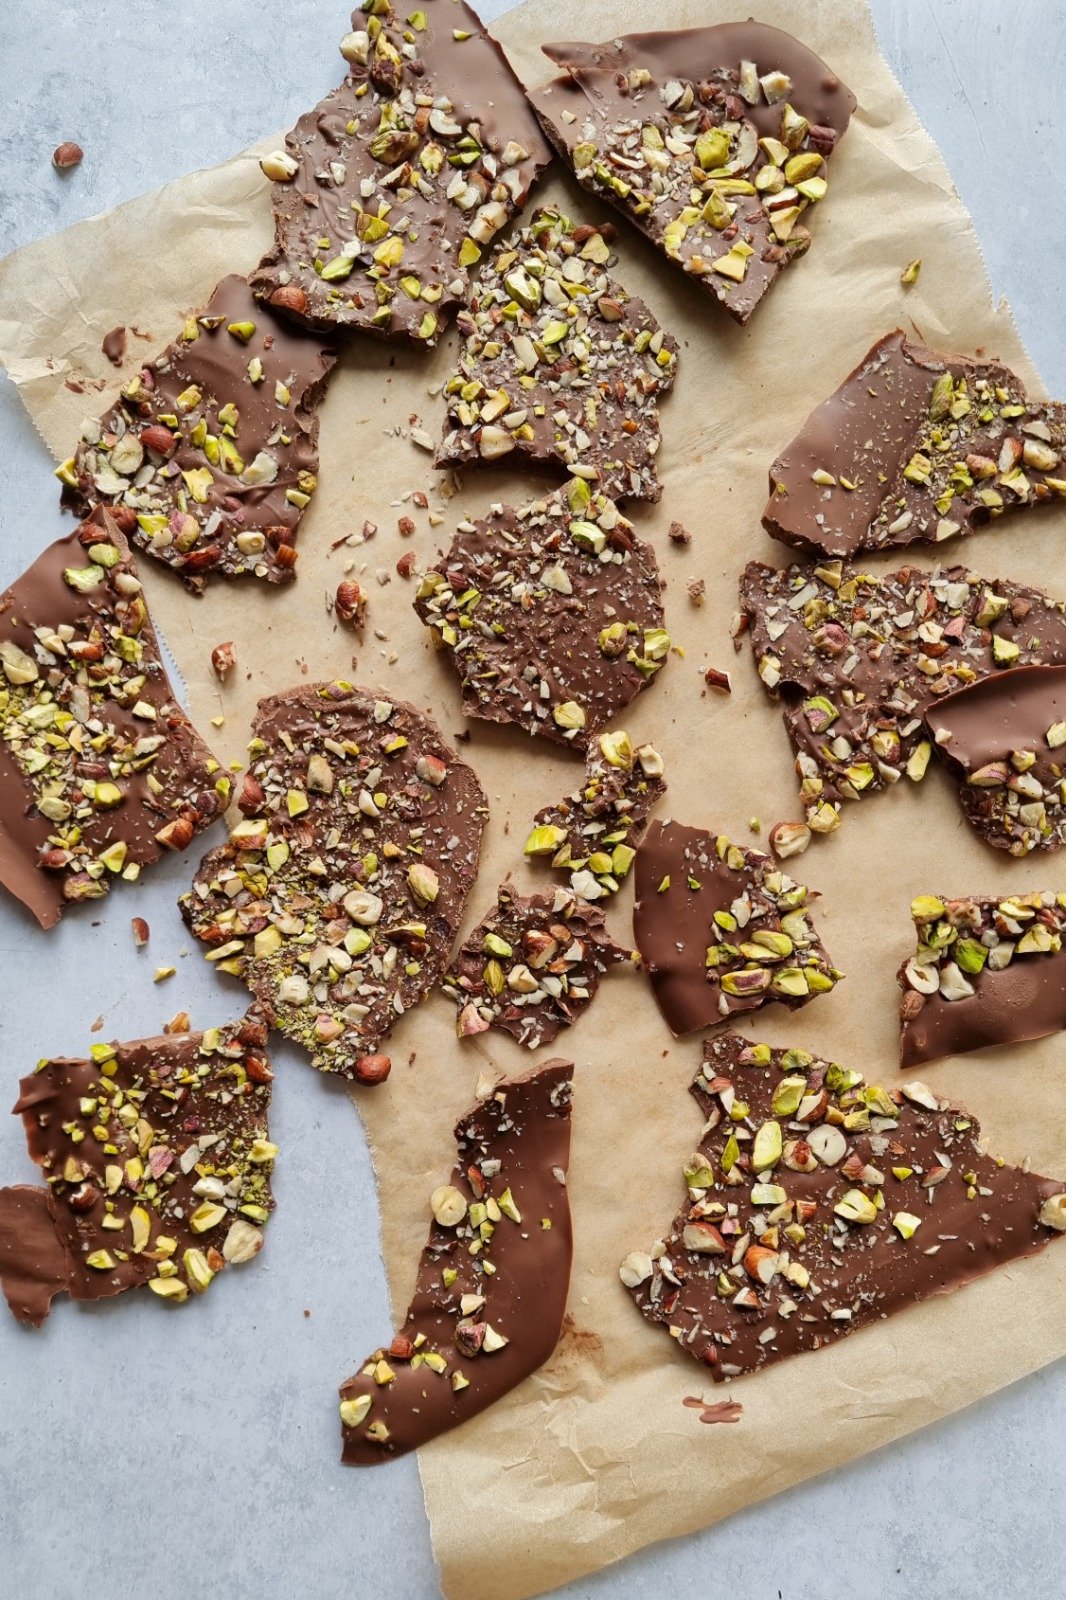 Easy To Make Homemade Chocolate Bark with Pistachios